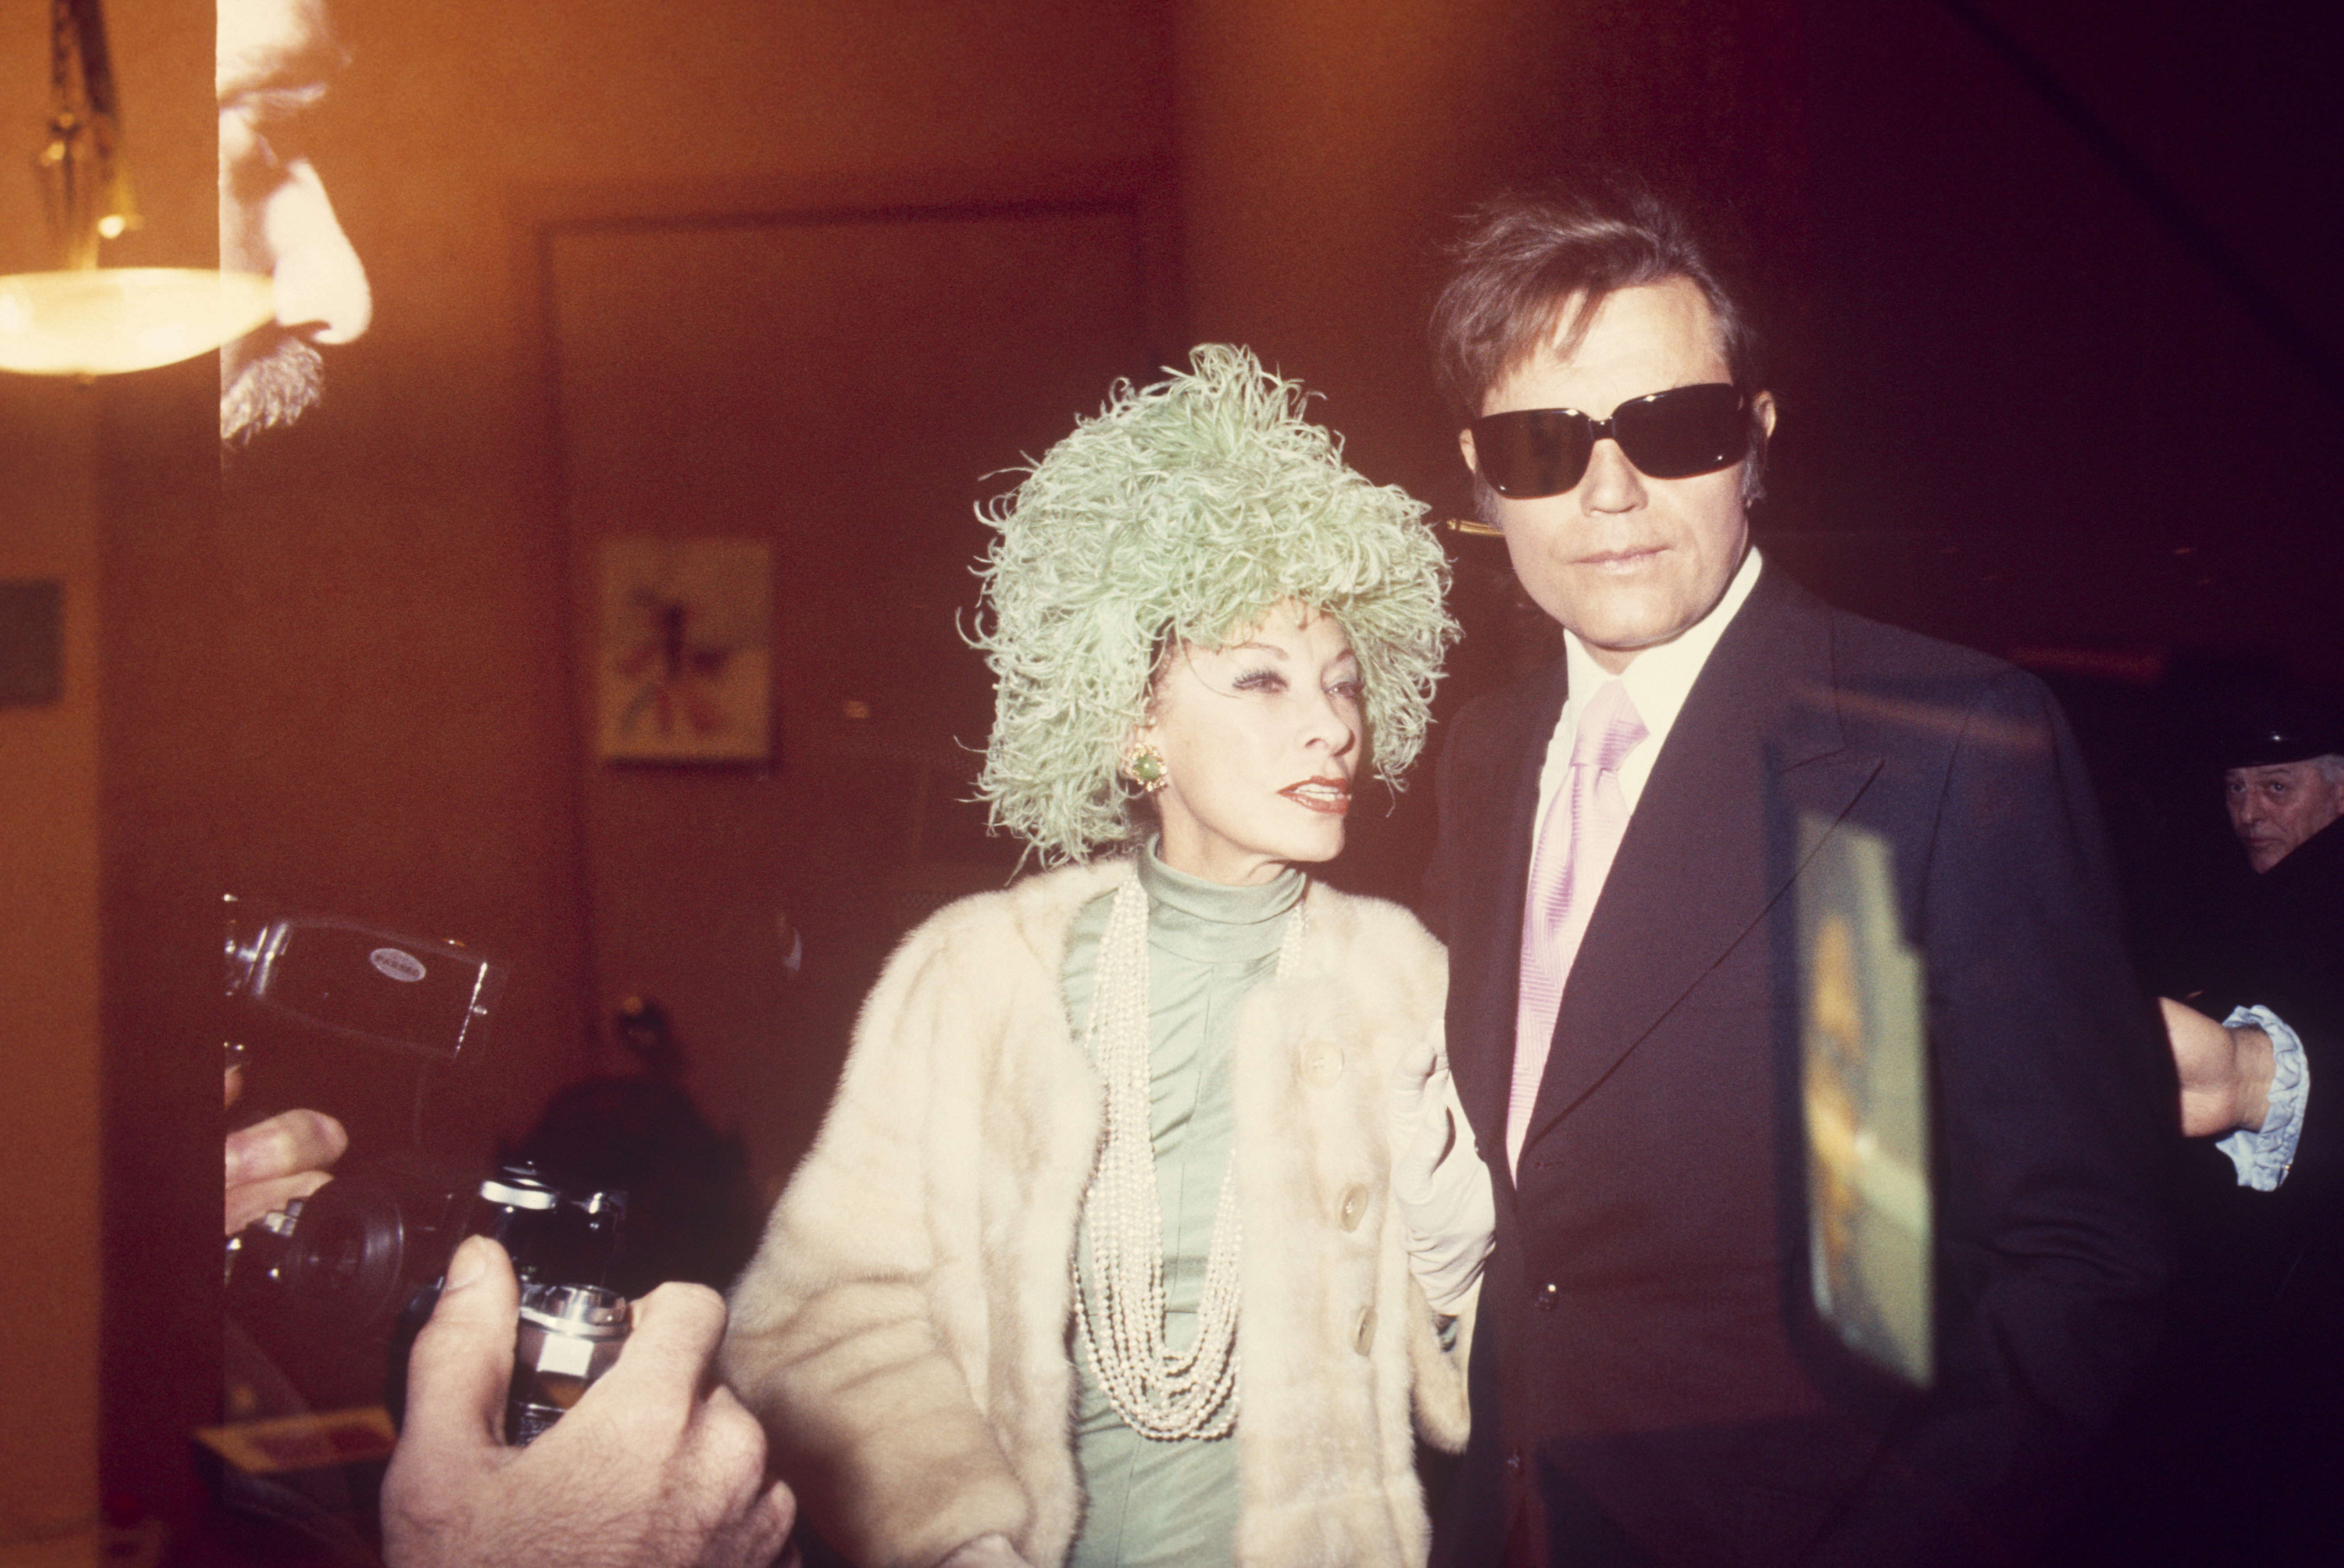 Actor Jack Lord and wife Marie Denarde on October 27, 1985 leave The Regency Hotel in New York City. | Source: Getty Images